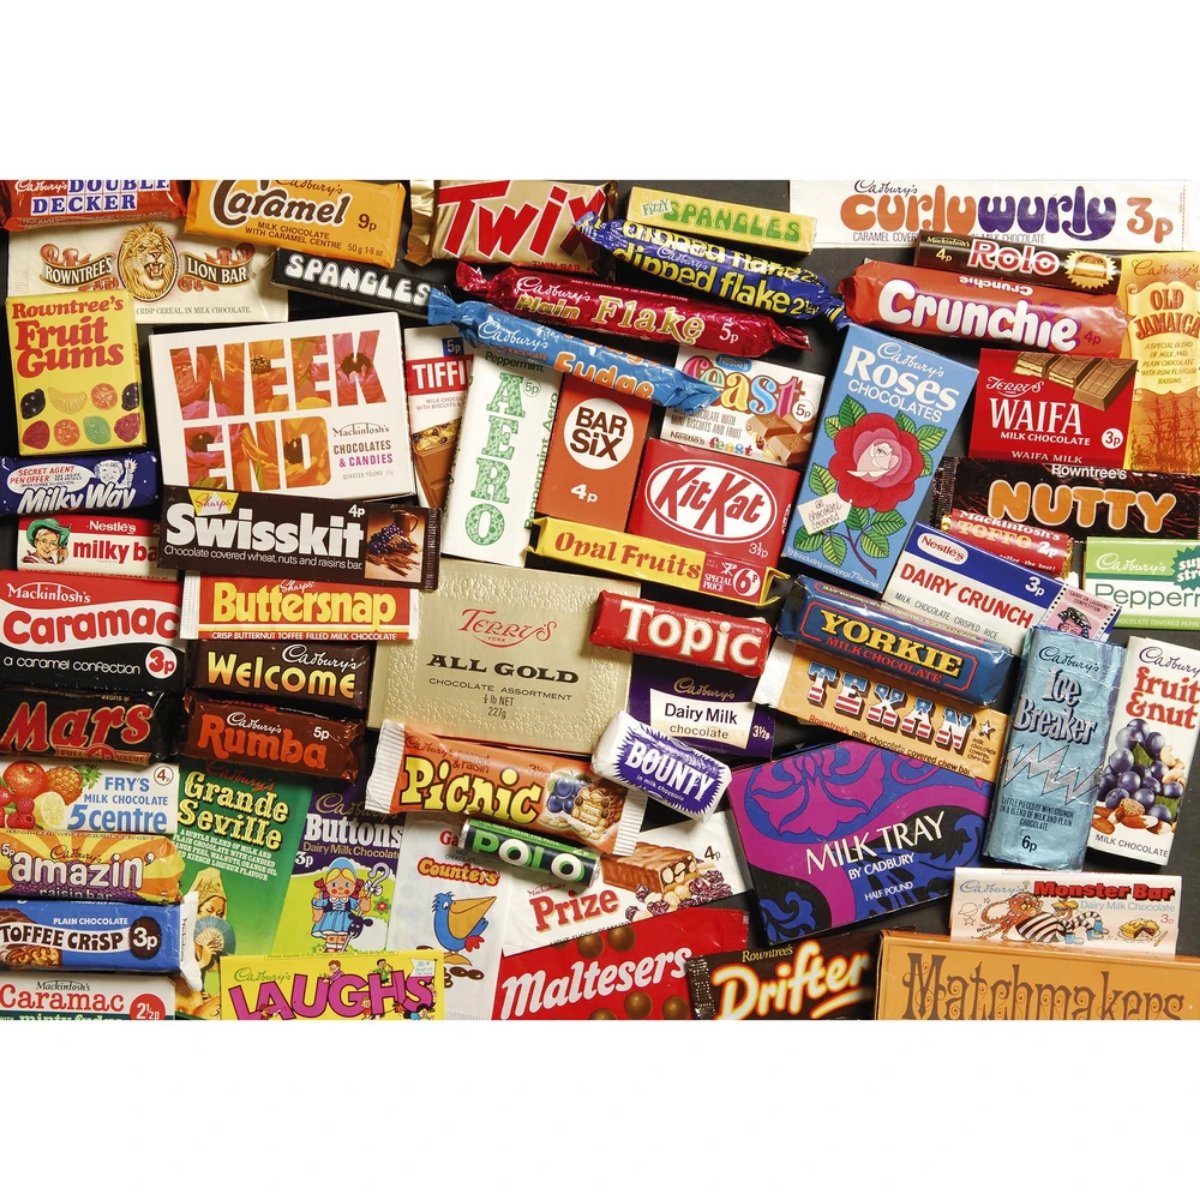 Gibsons 1970s Sweet Memories Gift Tin Jigsaw Puzzle (500 Pieces) - Phillips Hobbies